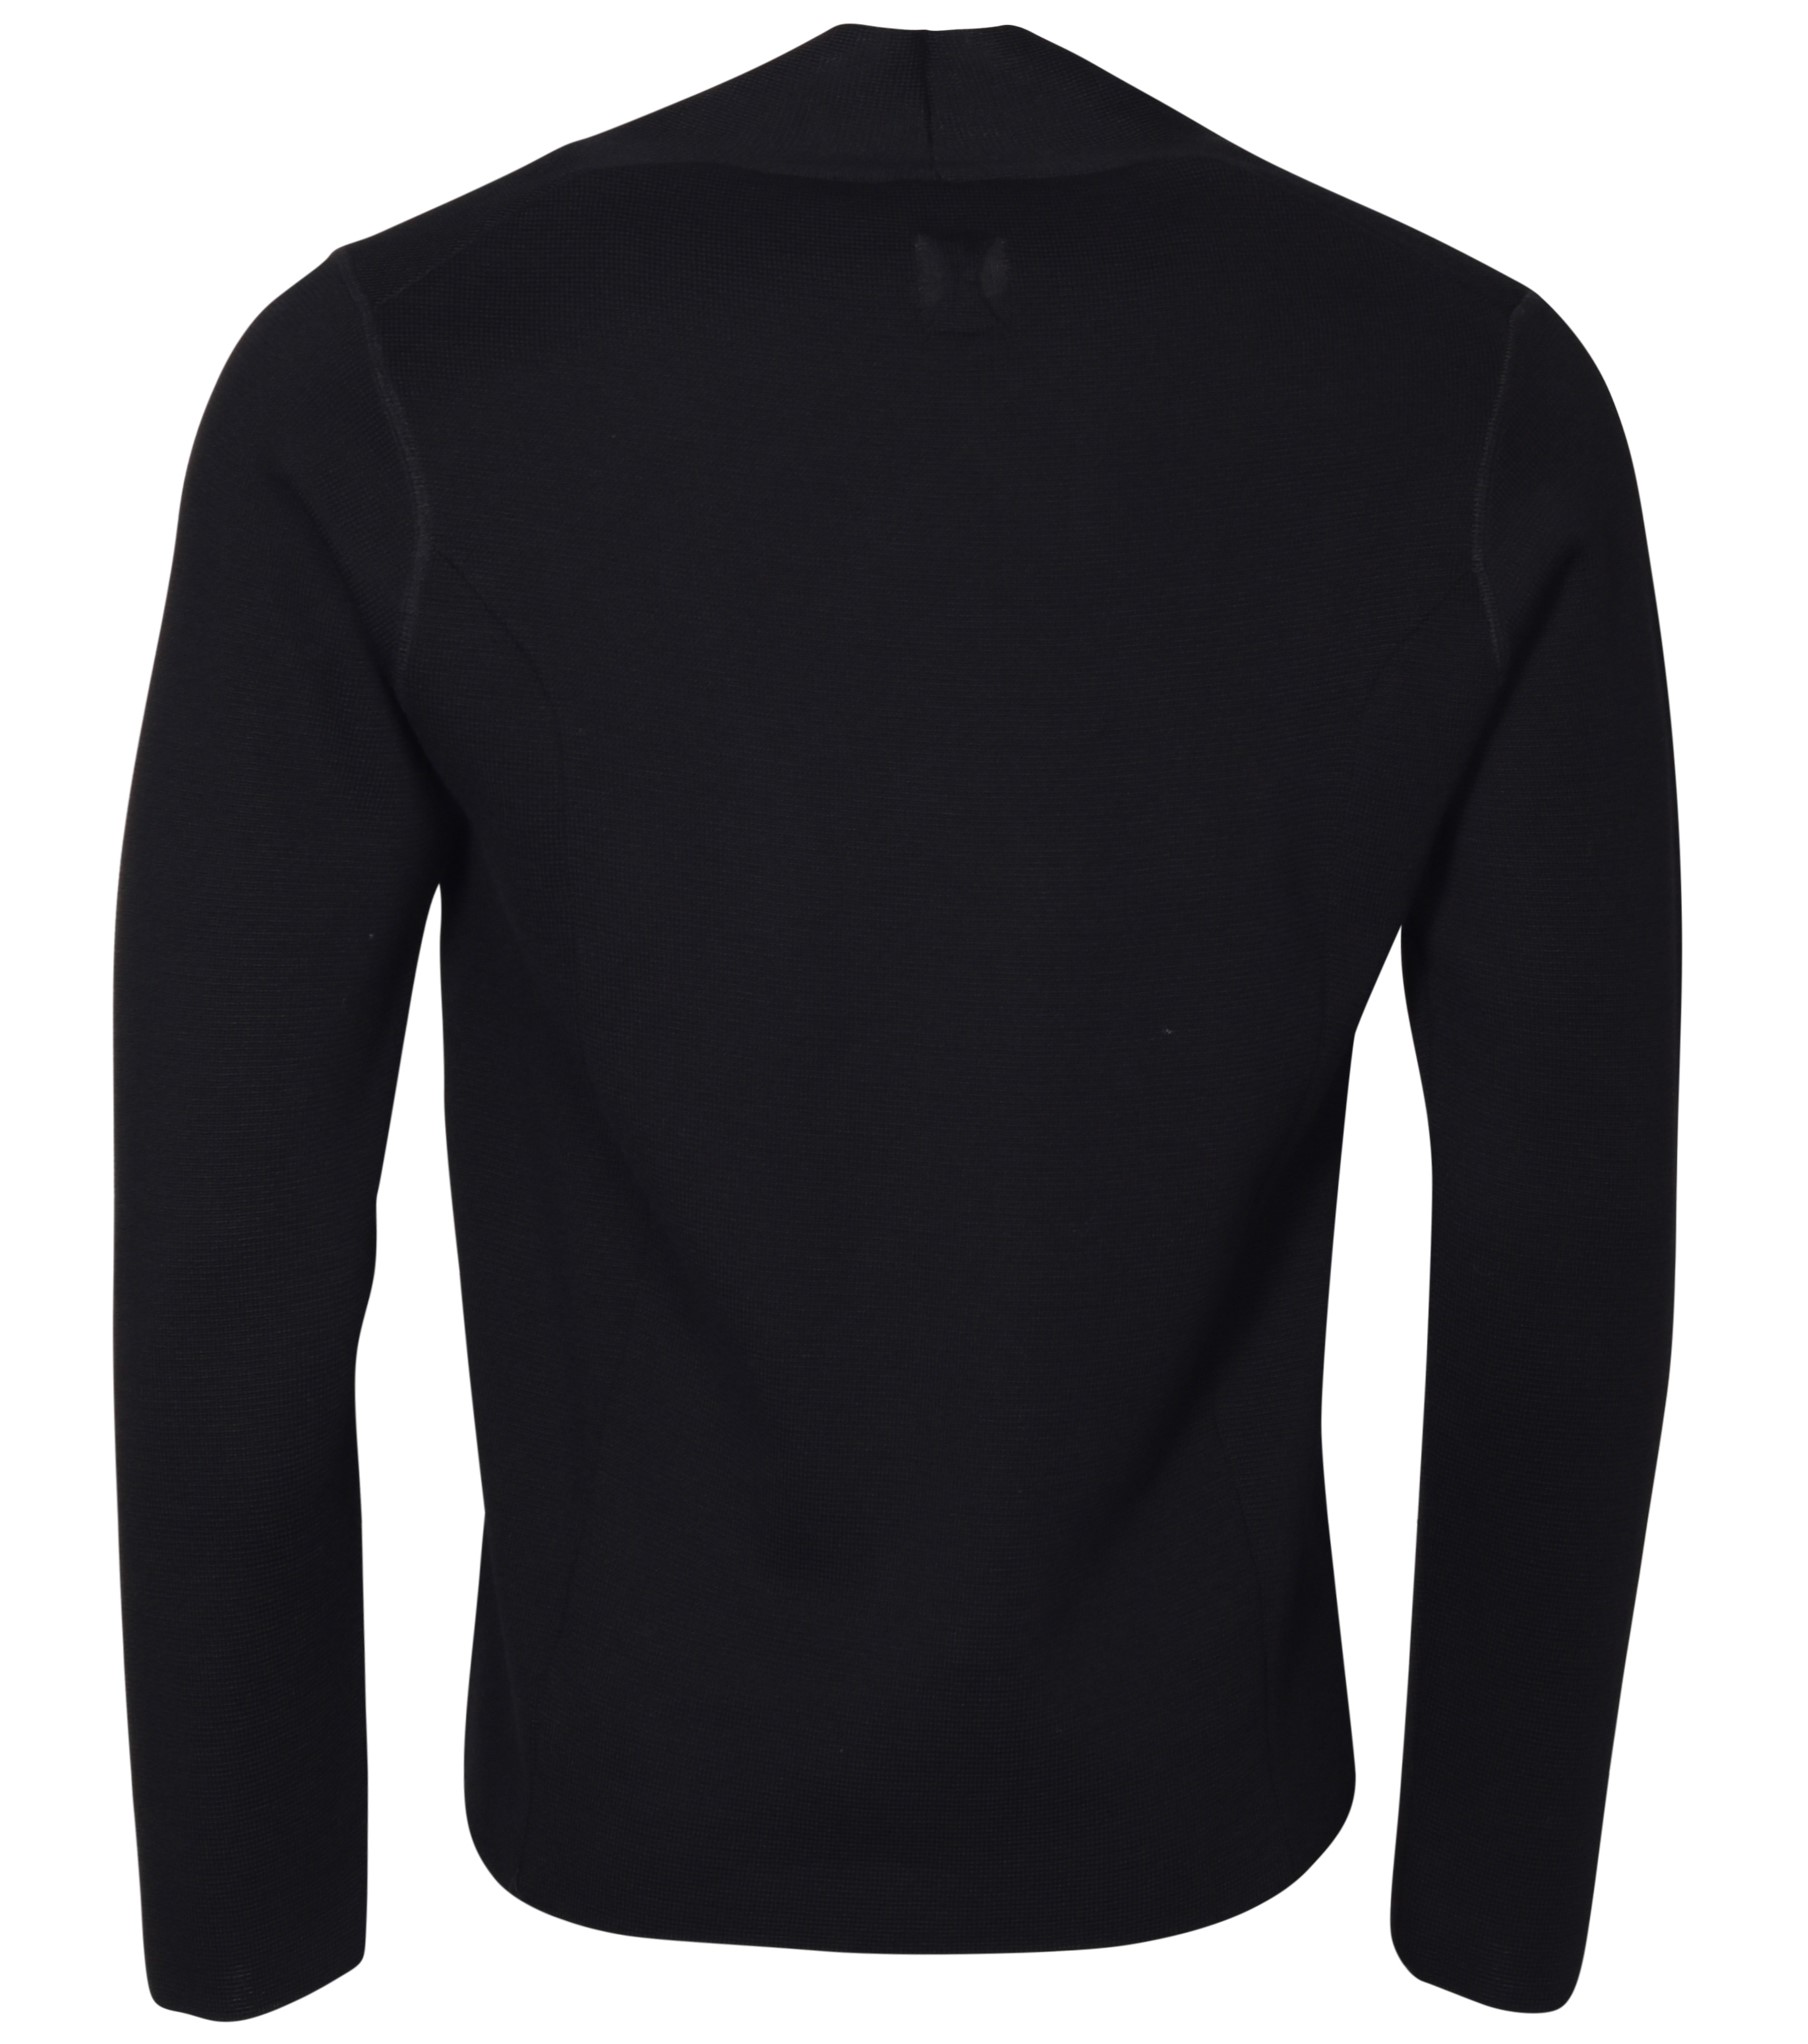 HANNES ROETHER Knit Sweater in Black